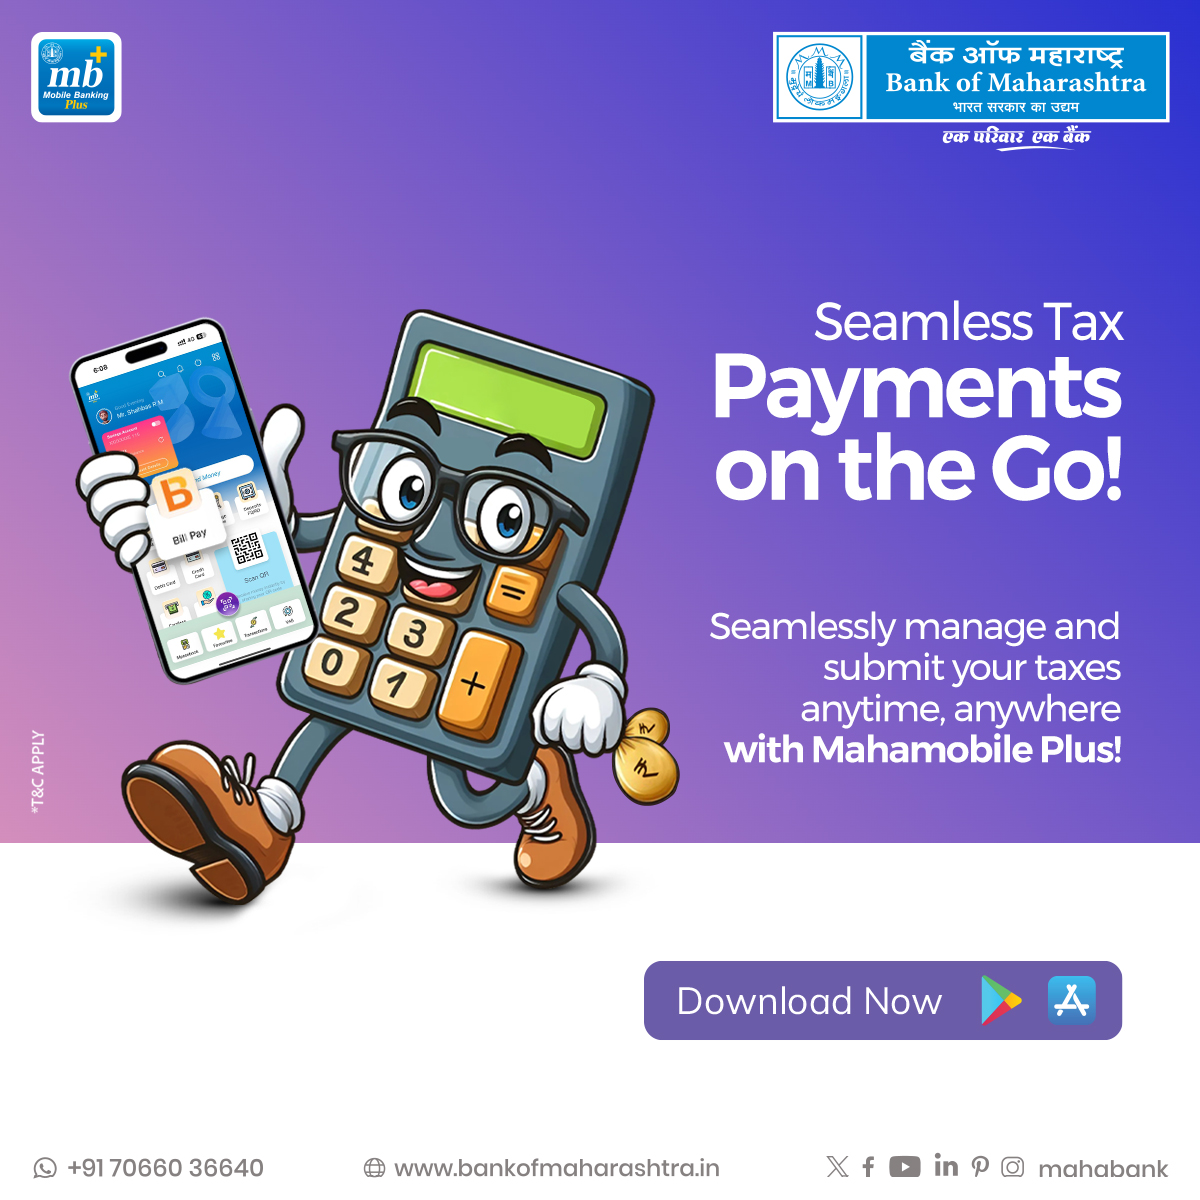 Streamline your tax payments with Mahamobile Plus! Experience seamless tax payments and never miss a deadline again. Download the app today !

Download the App: bit.ly/41WsT4A

#BankofMaharashtra #Mahabank #TaxPayment #MahamobilePlus